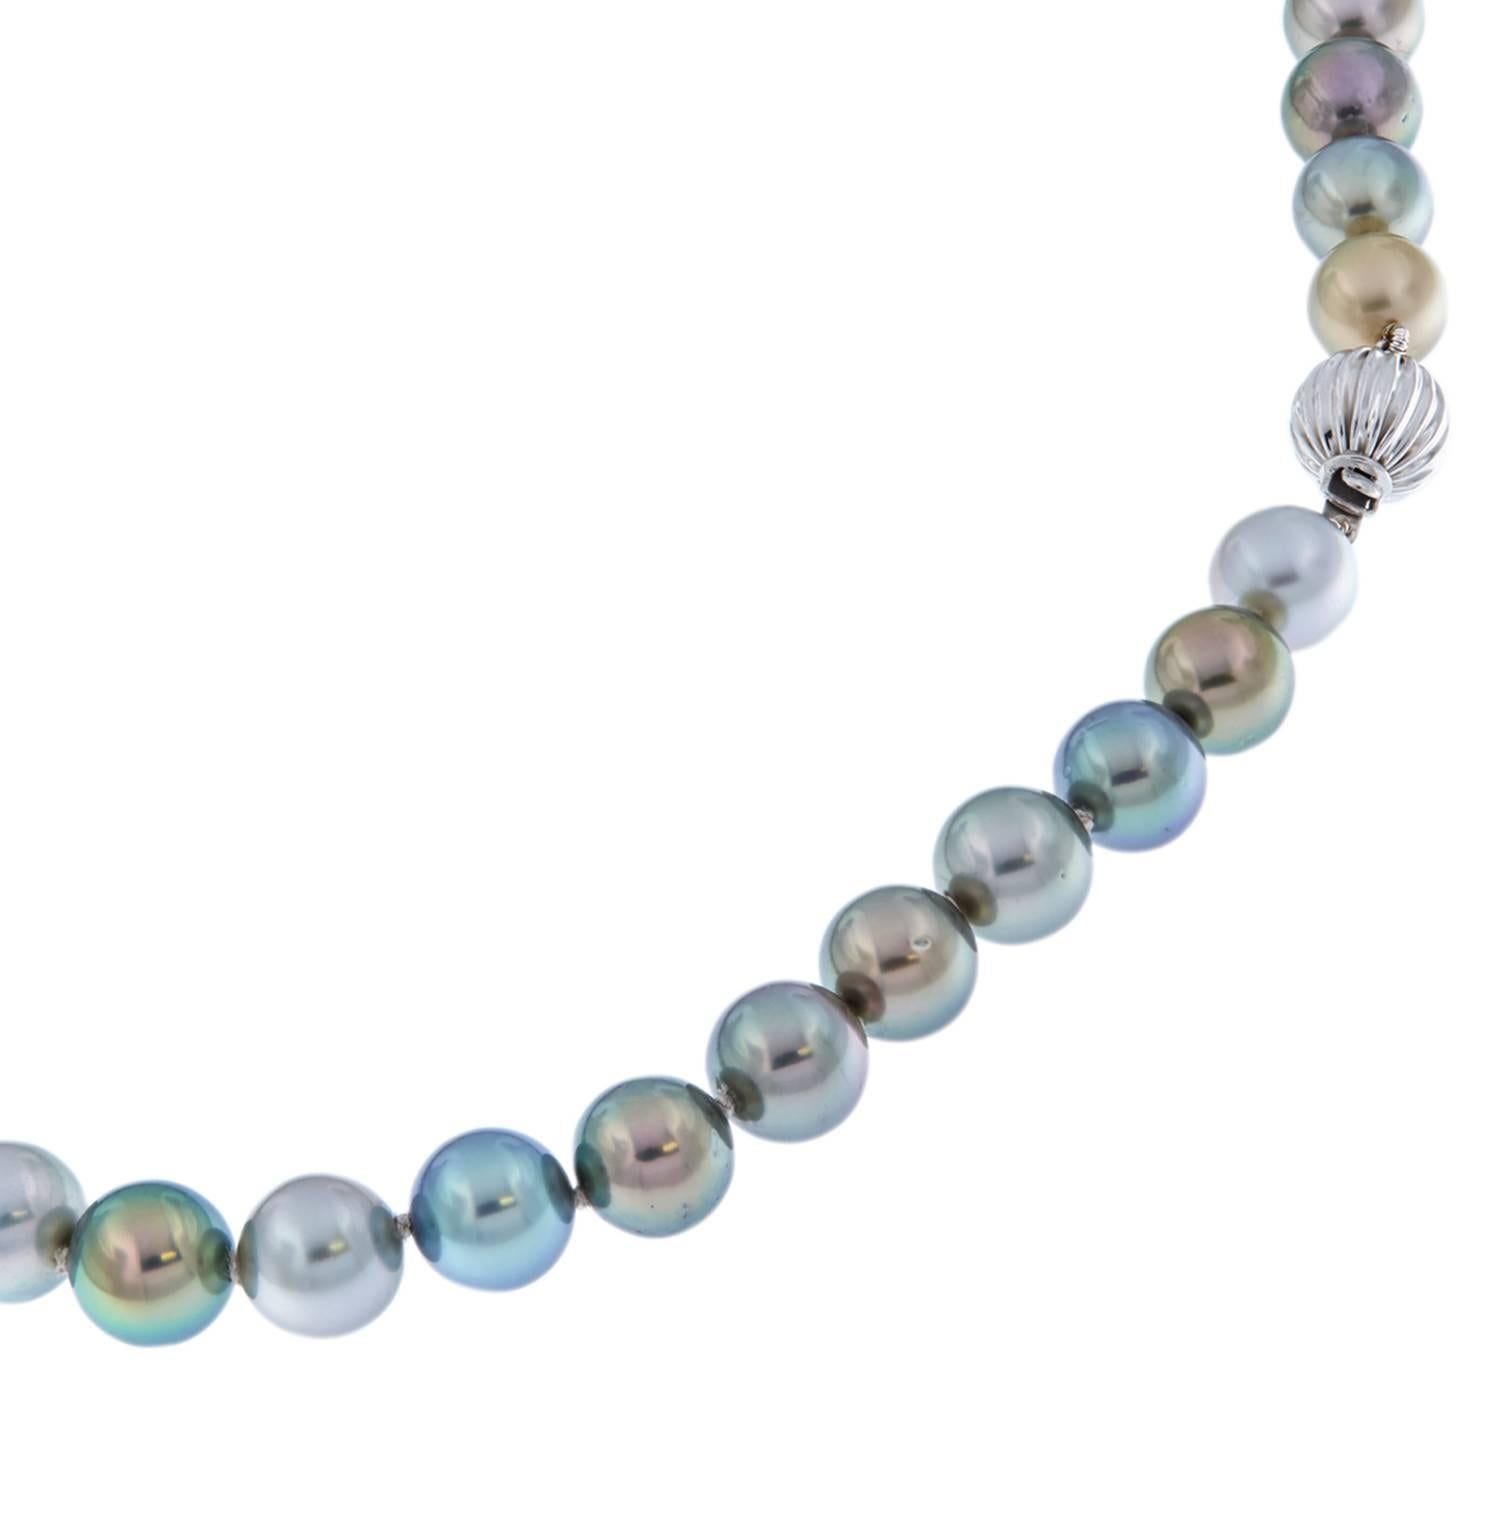 This stunning multi-colored necklace is a splash of irridescent hues. Necklace is comprised of 43 pearls, 9-11.5 mm. Clasp is 14k white gold. Weighs 58.2 grams. 18 in Long.